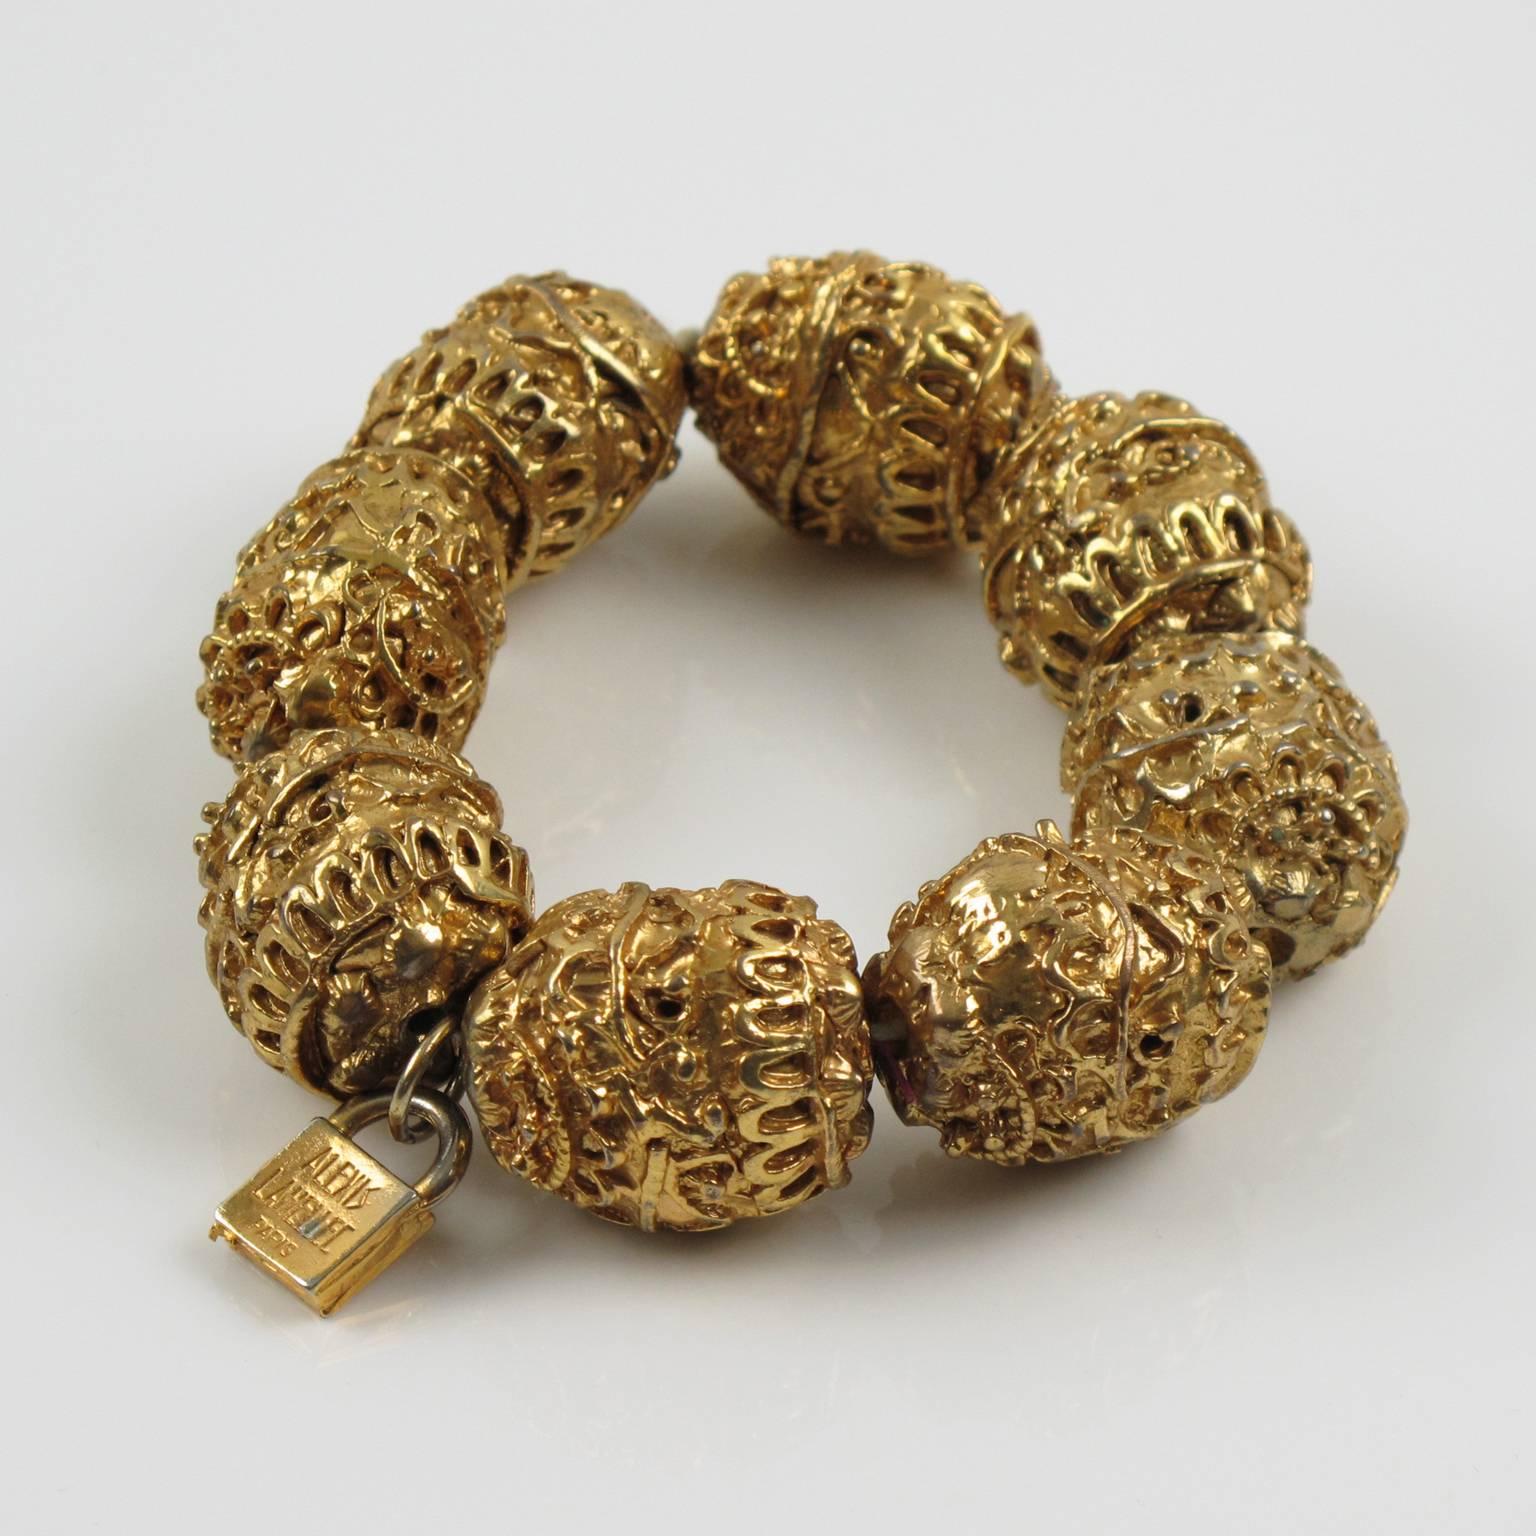 Rare French designer Alexis Lahellec Paris signed stretch bracelet. Unusual piece featuring eight large gilt metal coated resin carved beads, all textured and ornate with a baroque inspired design. Although beads are resin coated with gilt metal the